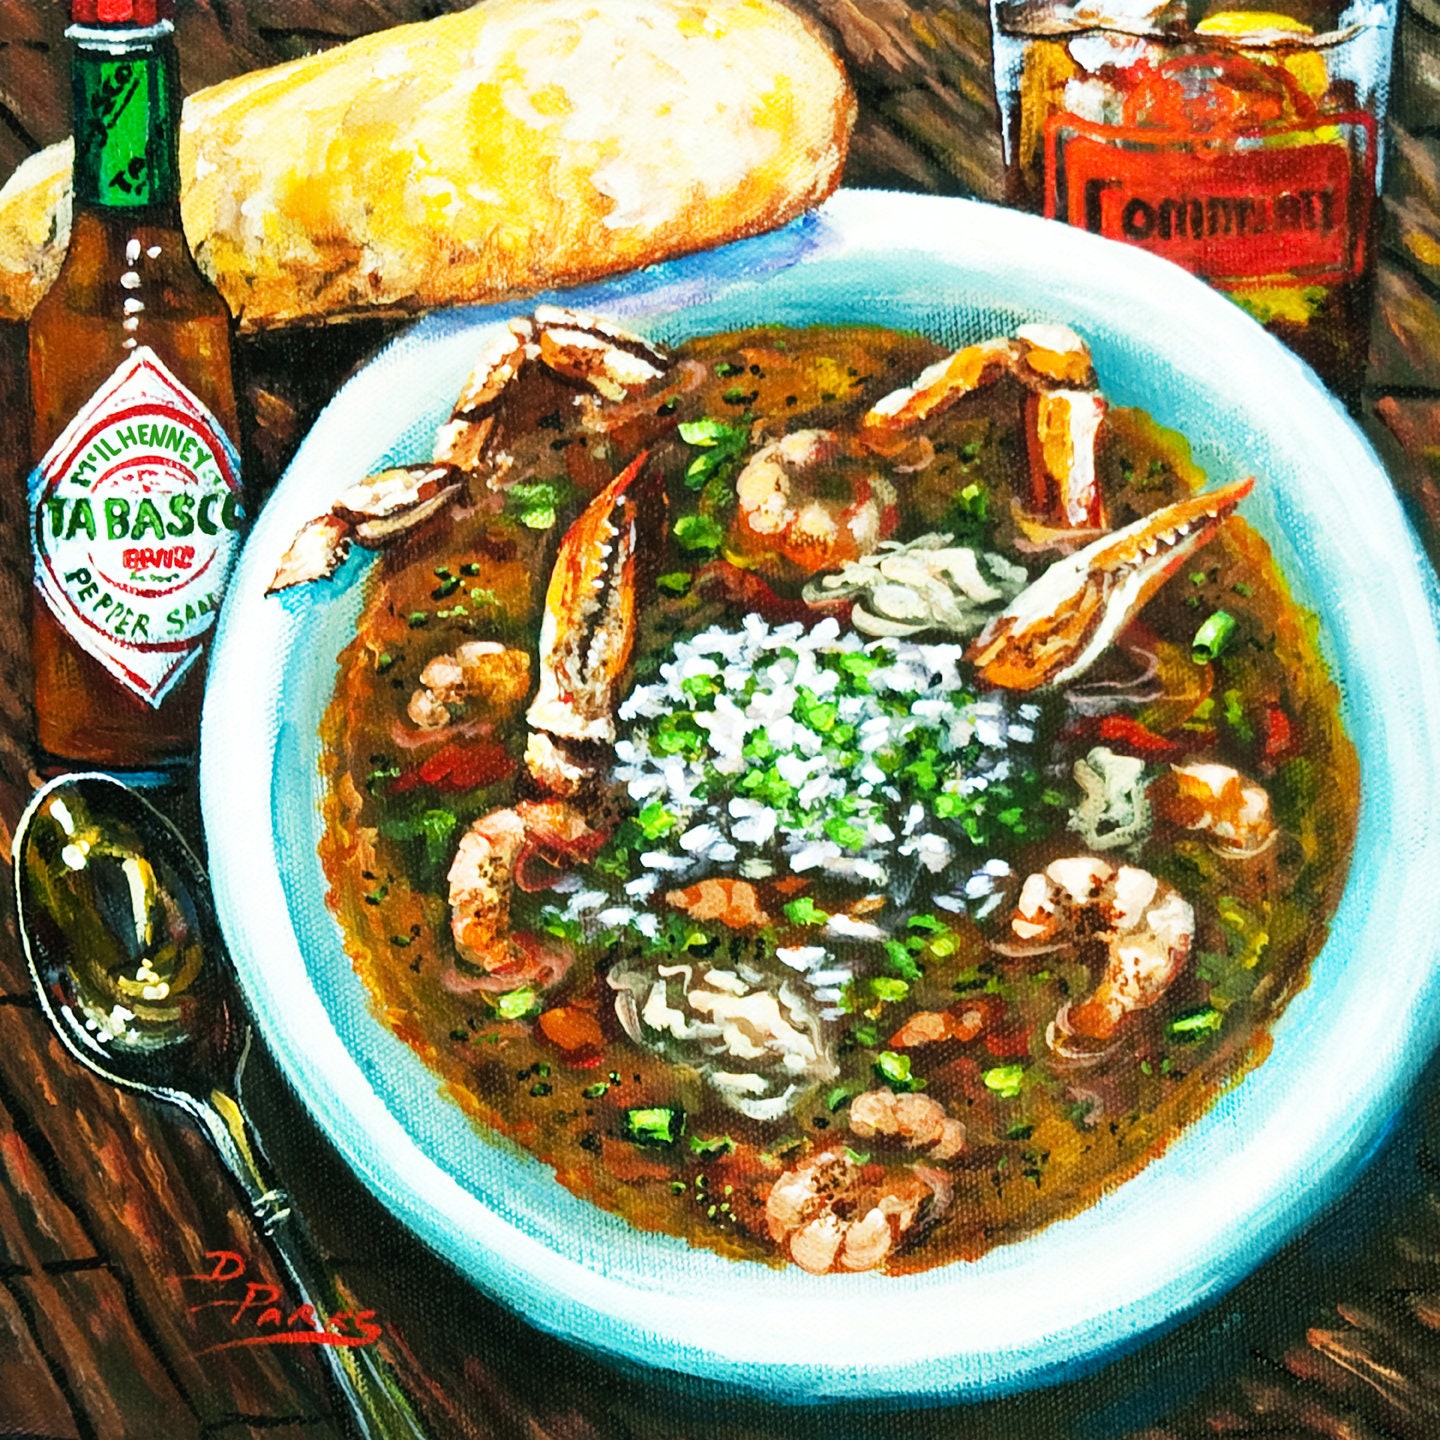 Seafood Gumbo, Crabs, Shrimp, Oysters in New Orleans Painting, Food Art - "Seafood Gumbo'